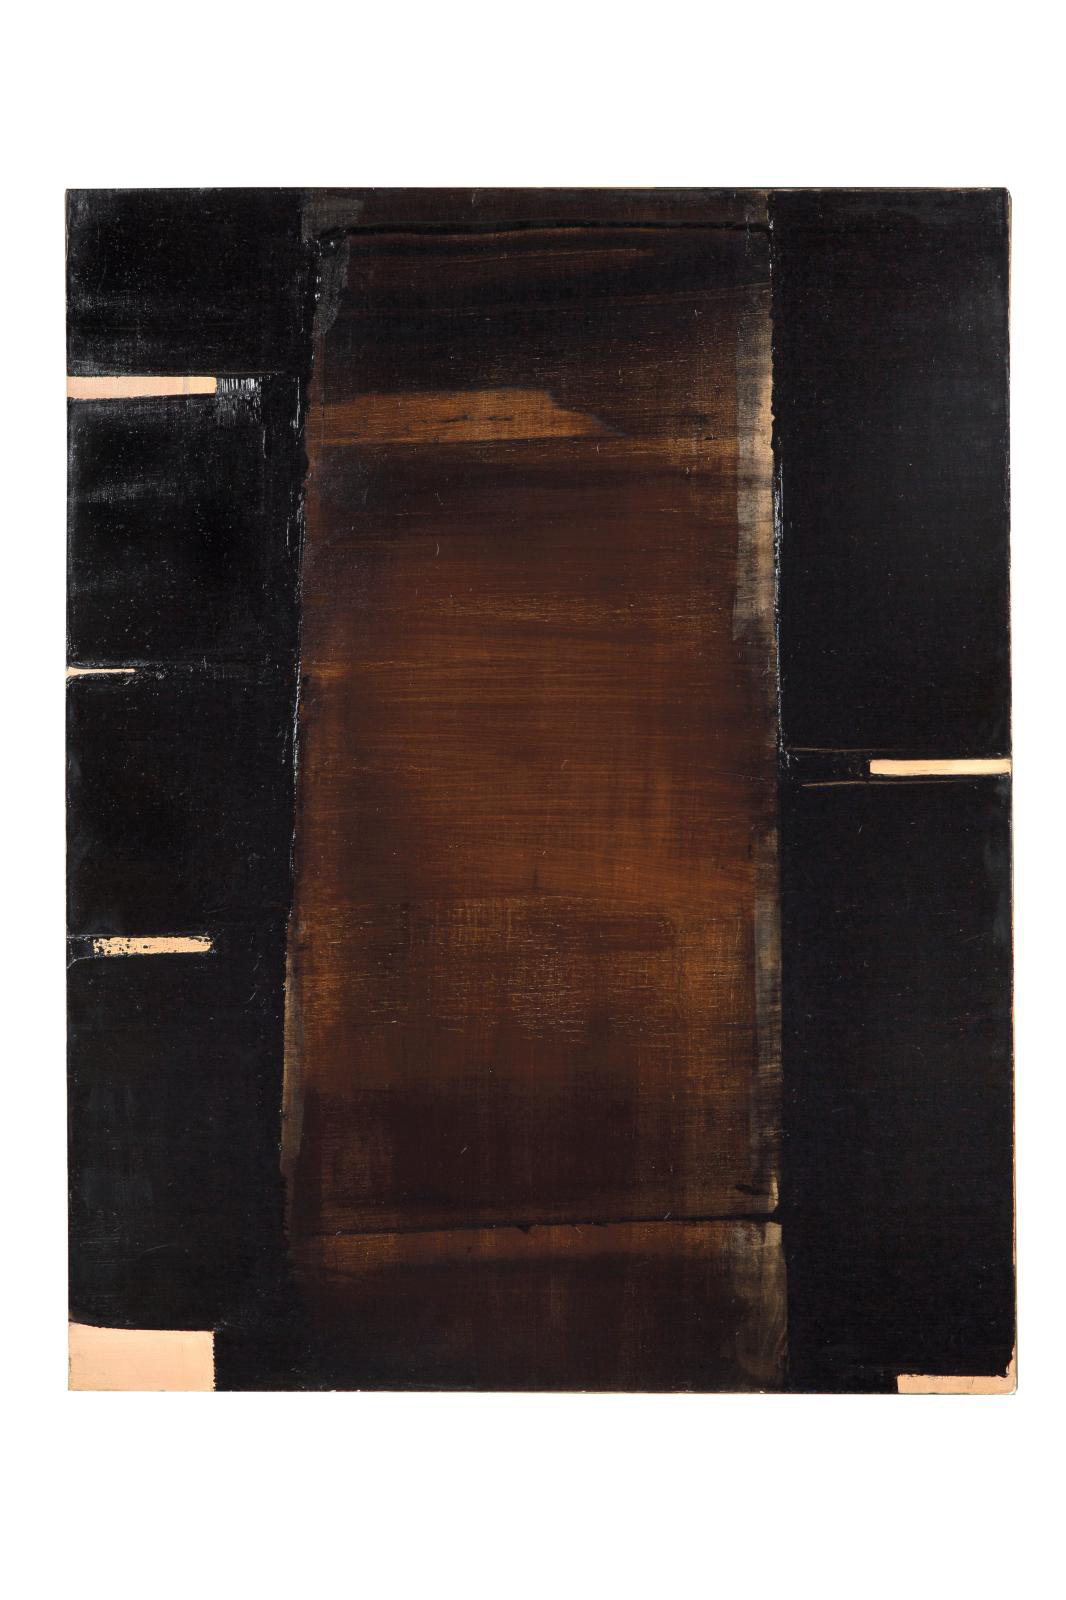 Soulages, Buffet, Baya and Shirley Jaffe 